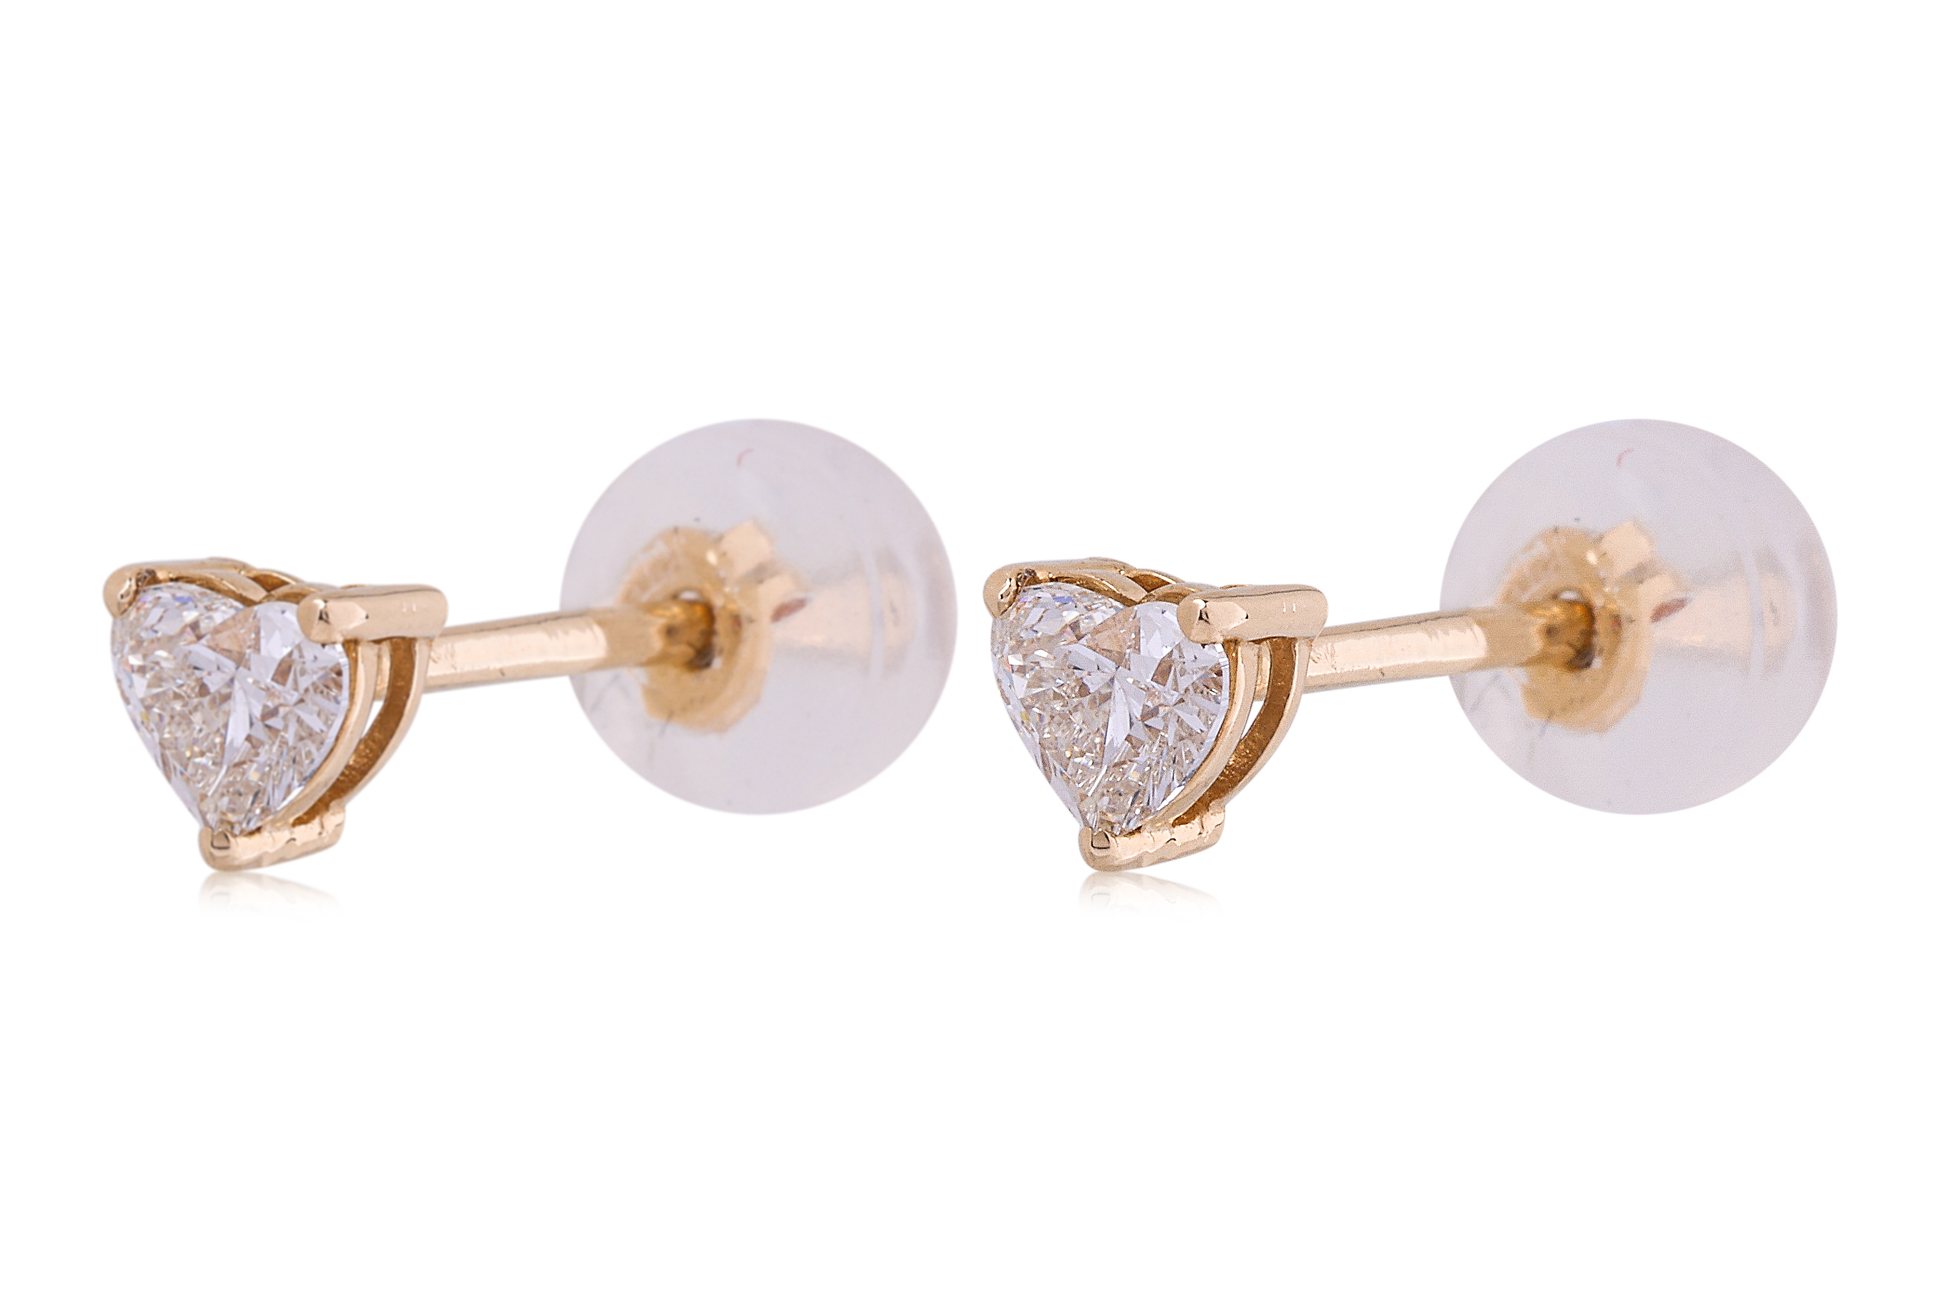 A PAIR OF HEART SHAPE DIAMOND SOLITAIRE STUD EARRINGS - Image 2 of 3